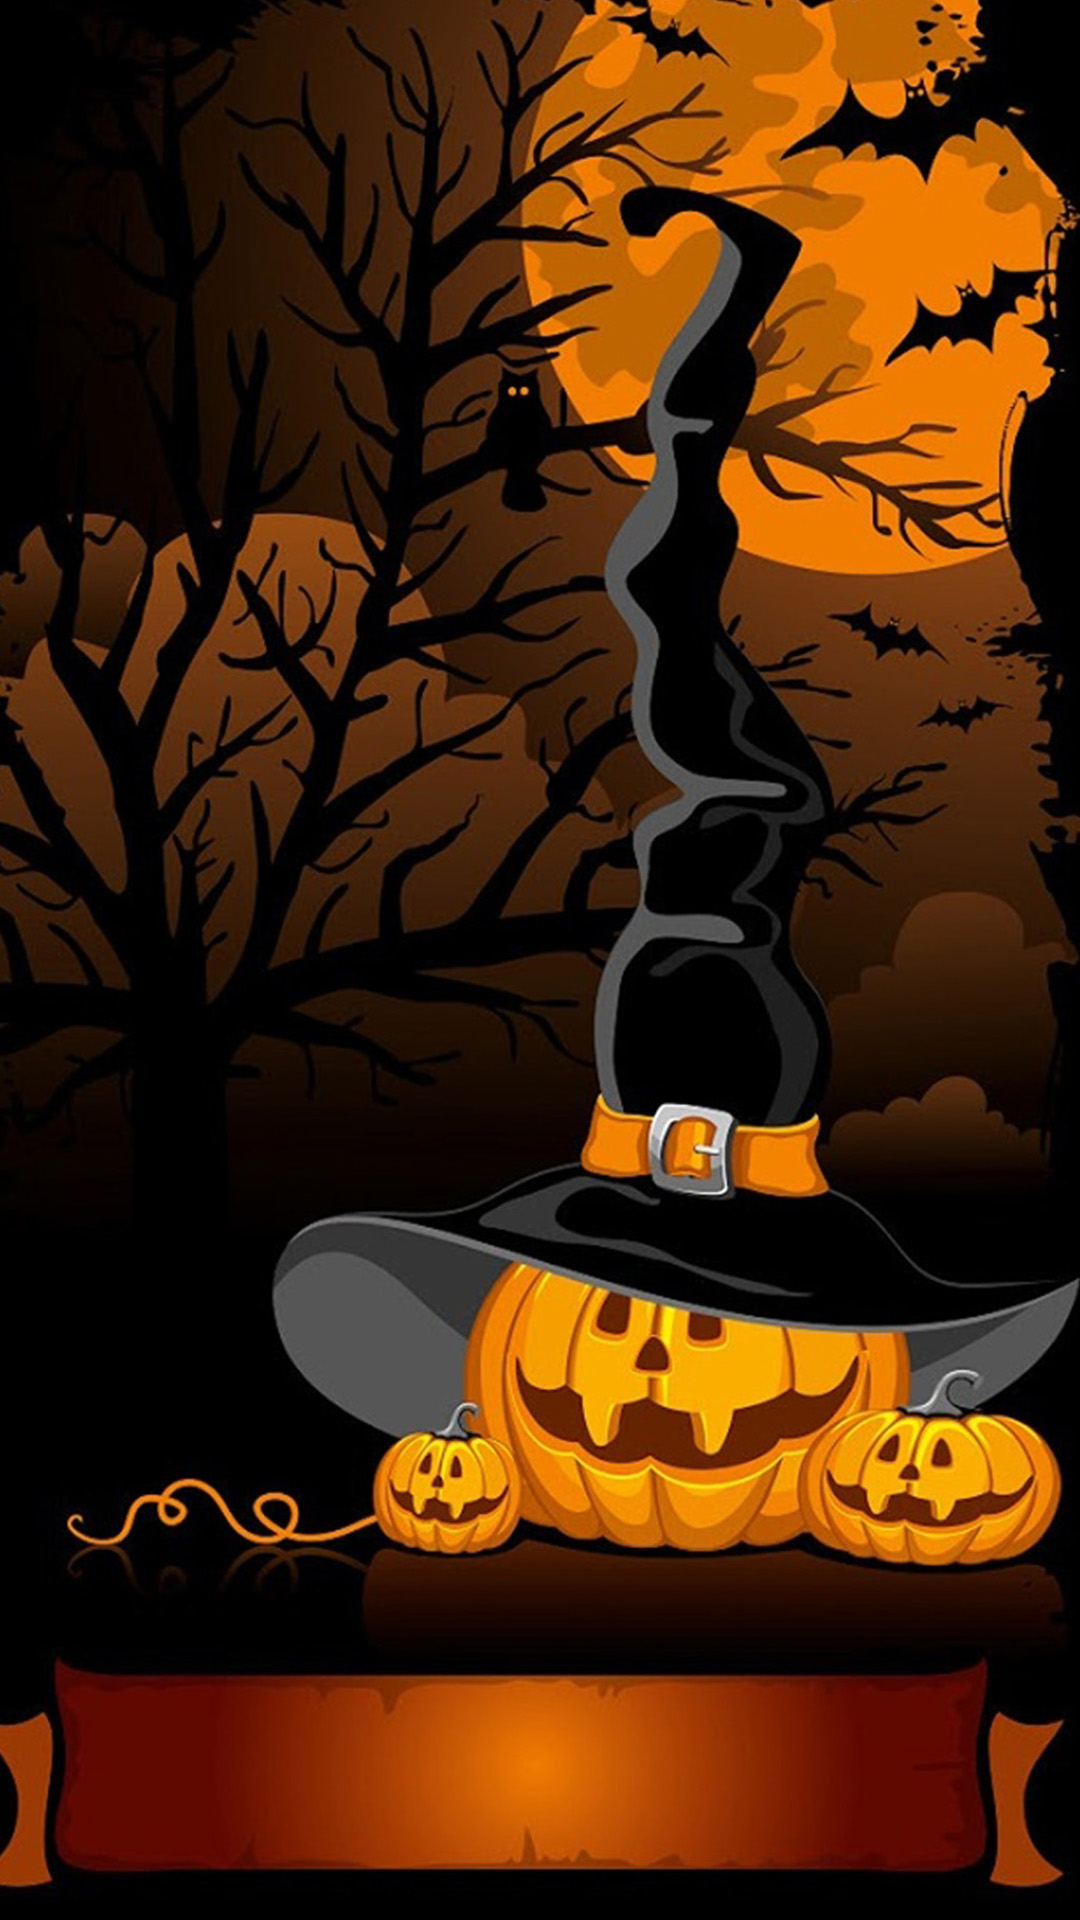  witchy halloween wallpaper witchy night halloween Car Pictures